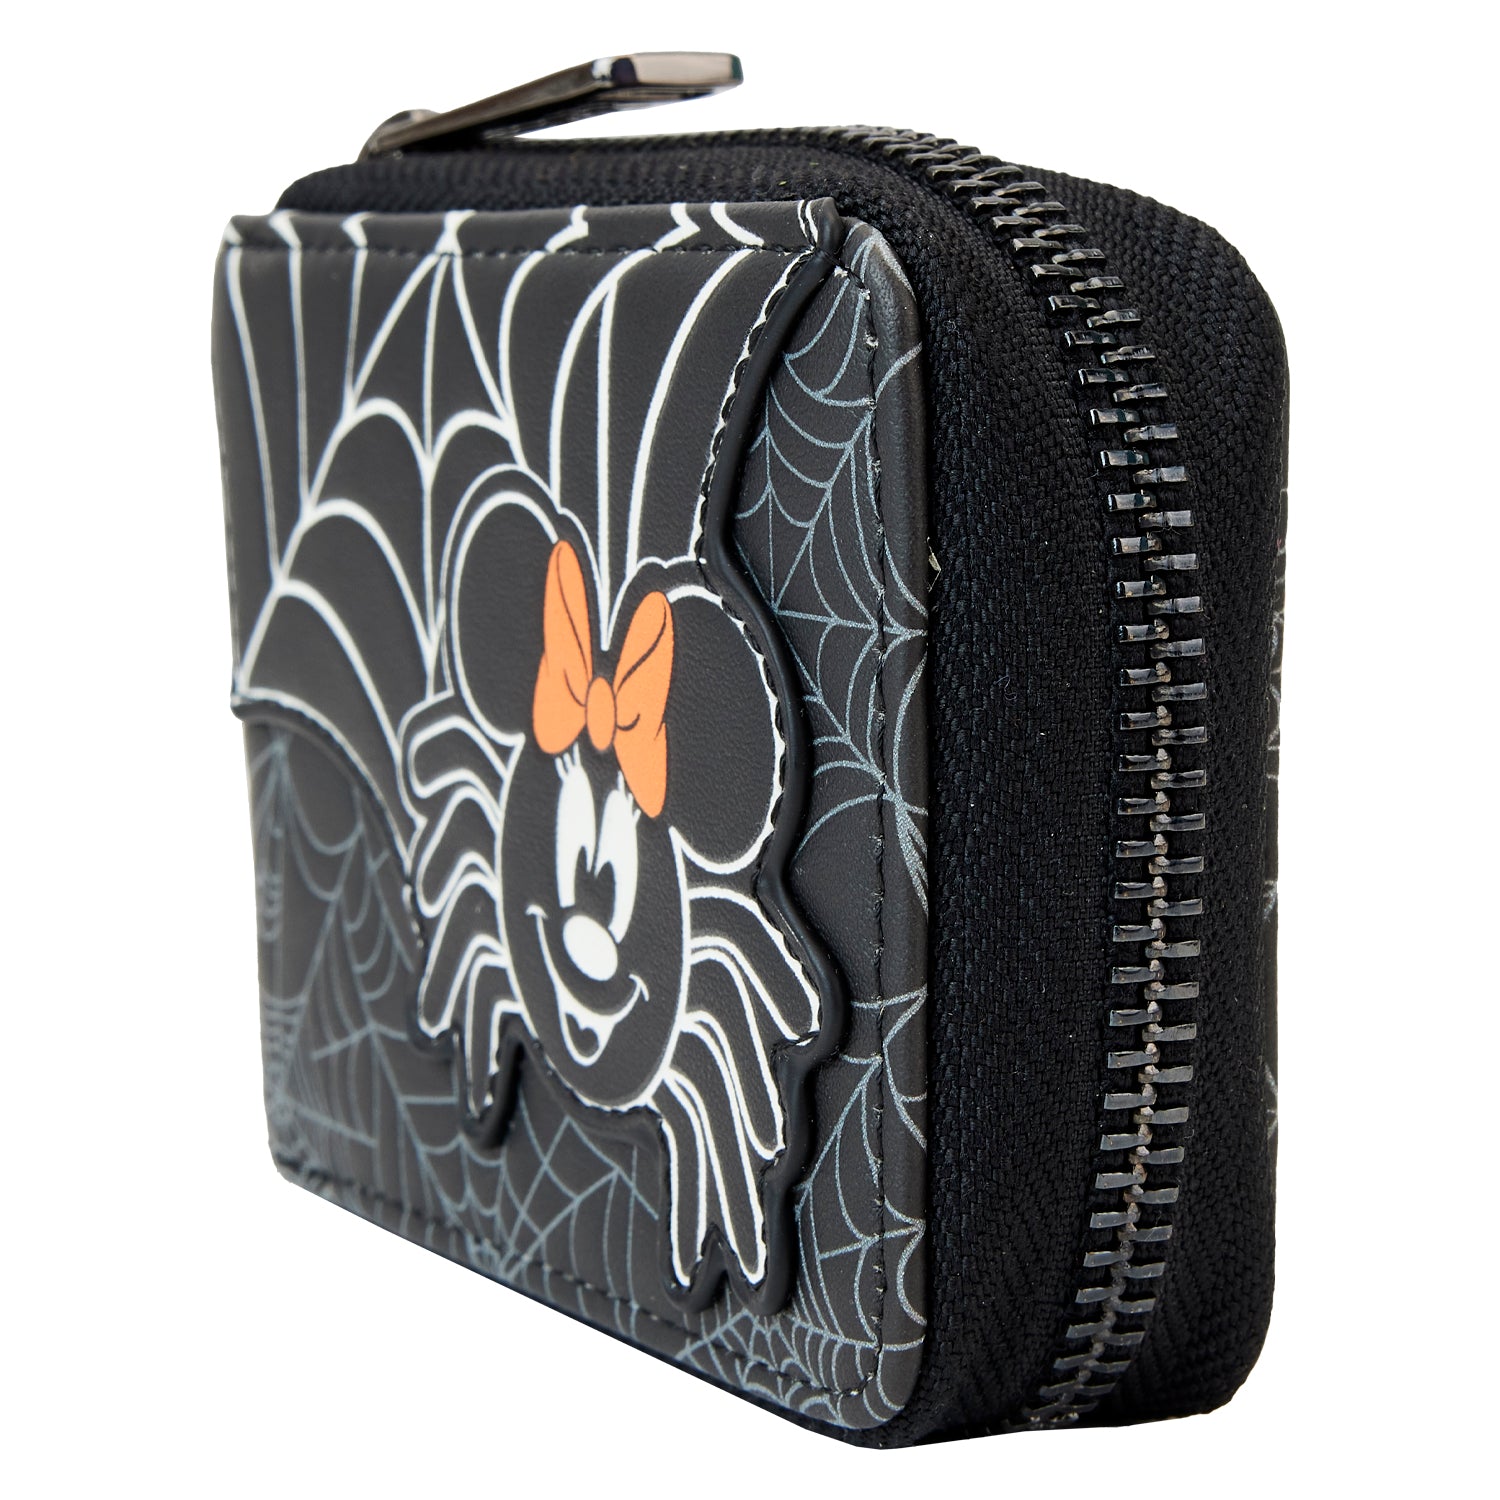 Loungefly x Disney Minnie Mouse Spider Accordion Wallet